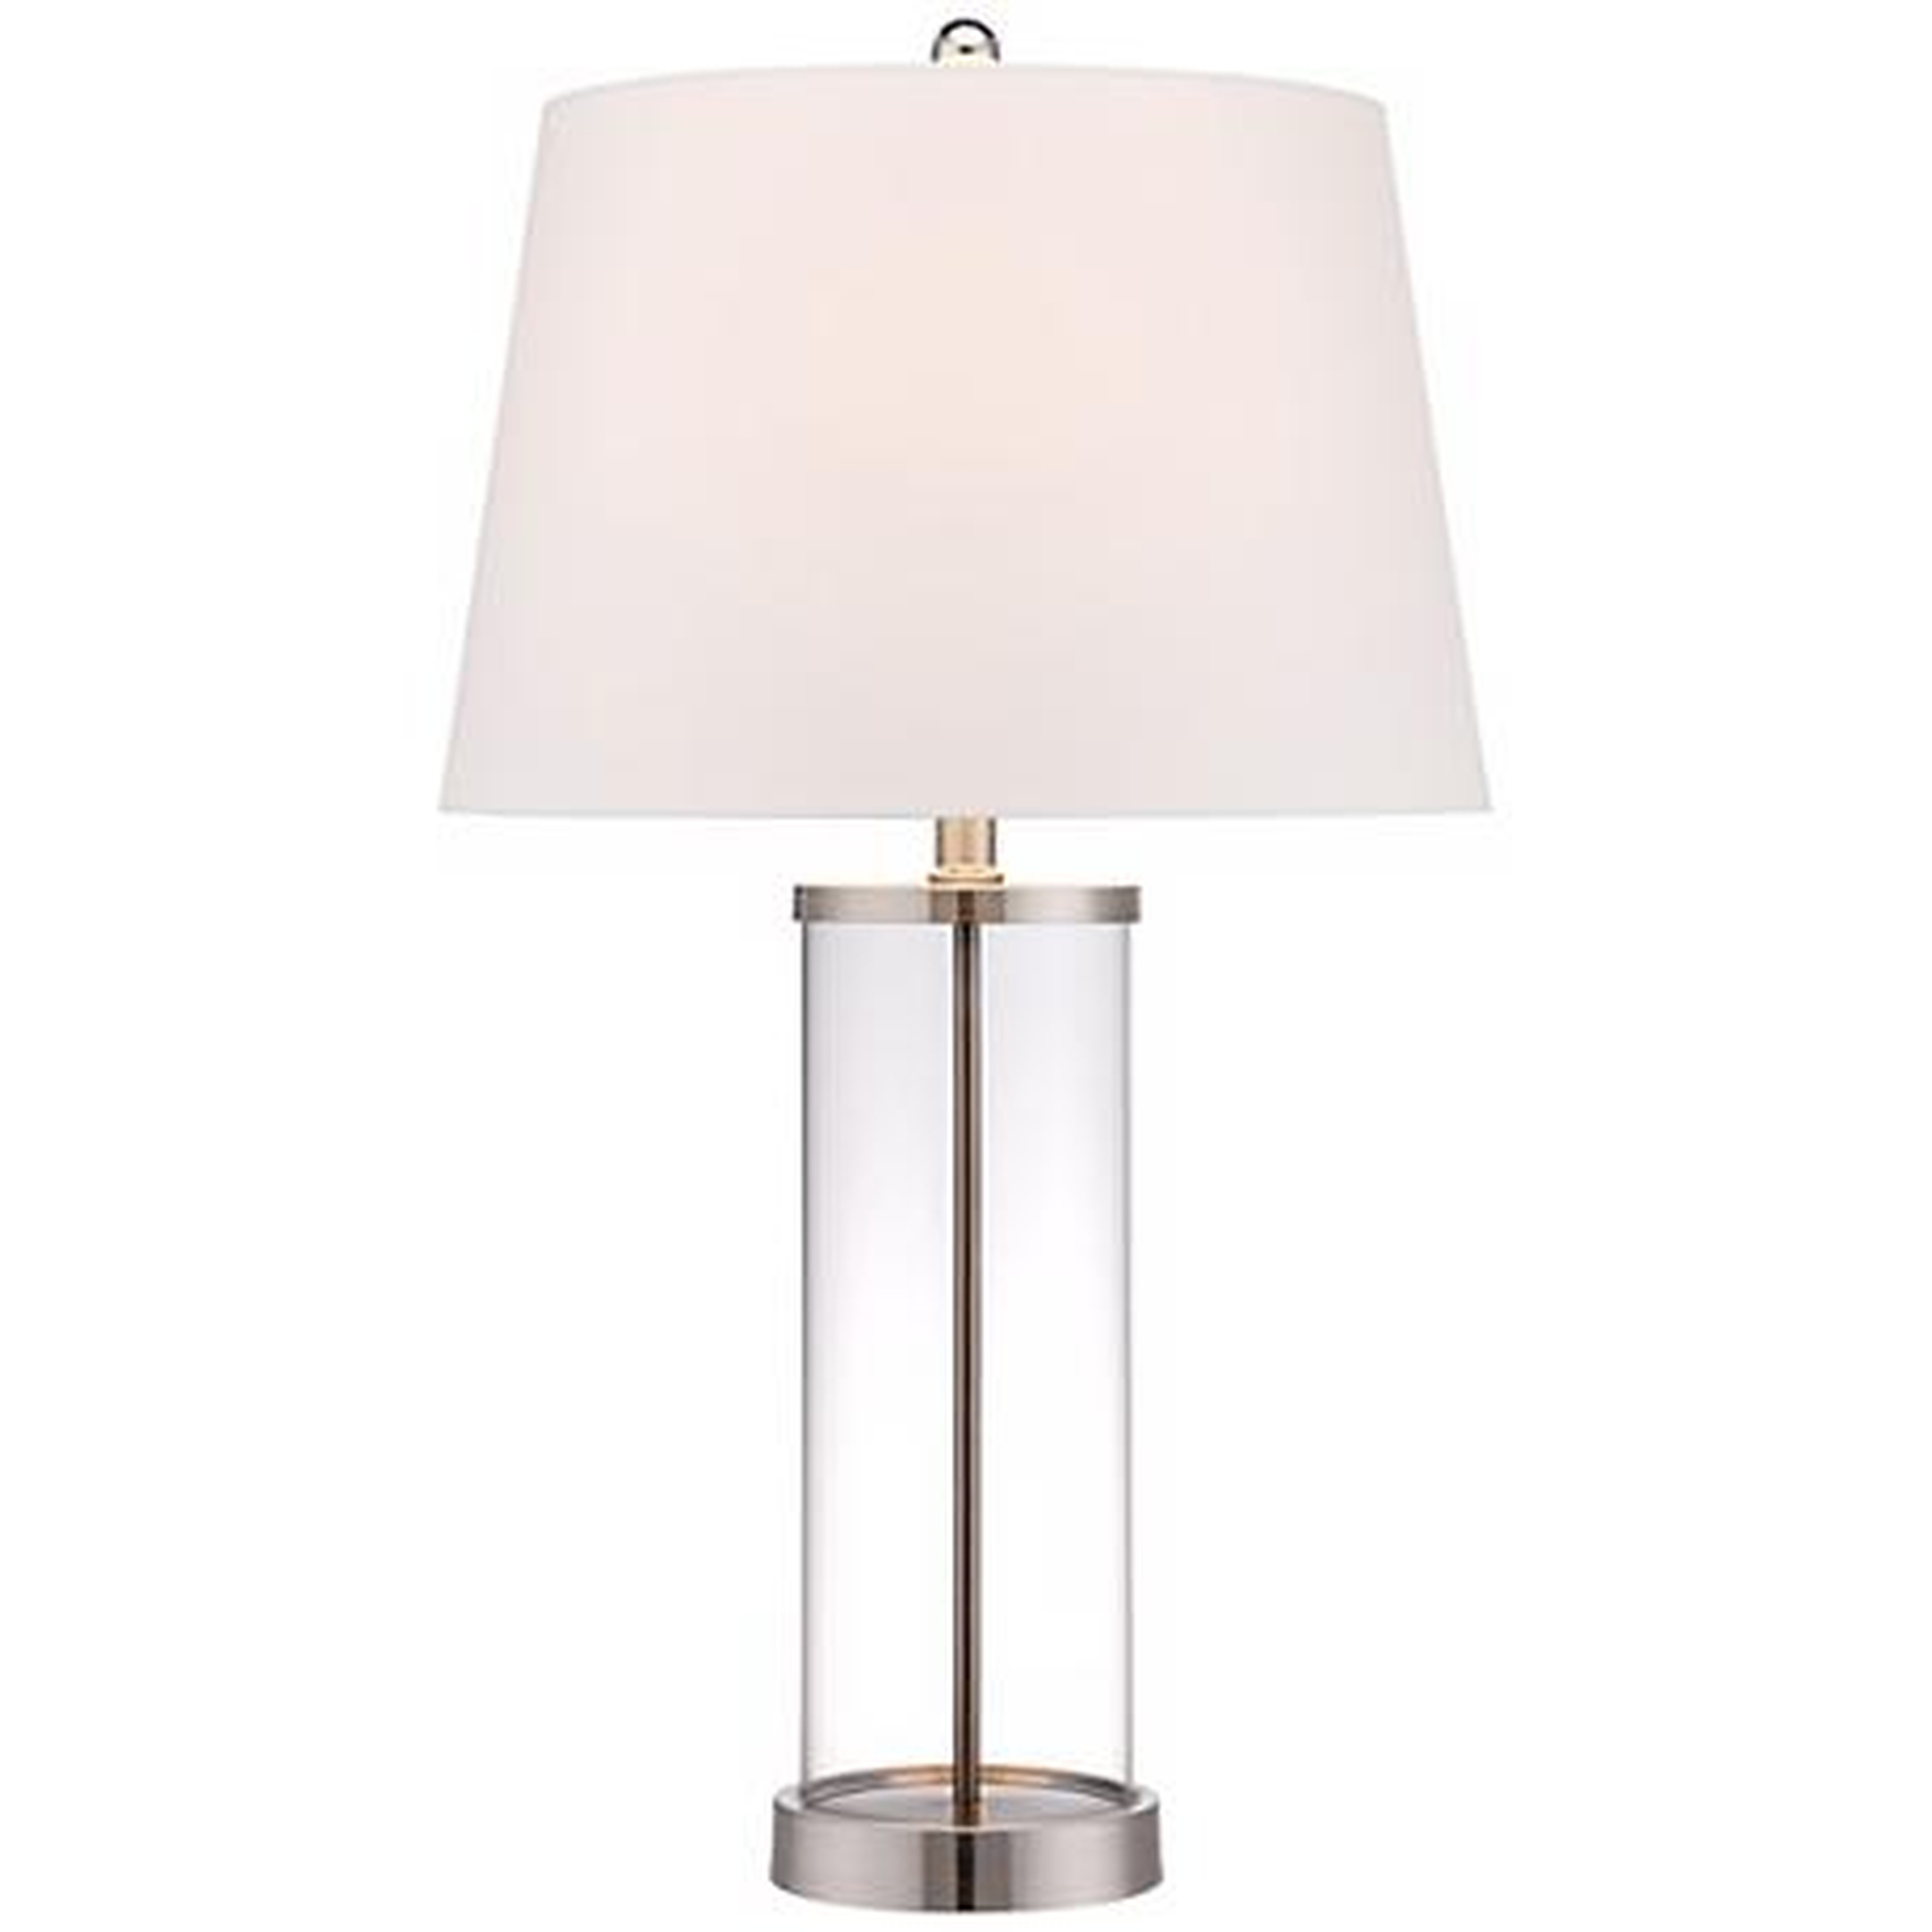 Glass and Steel Cylinder Fillable Table Lamp - Lamps Plus